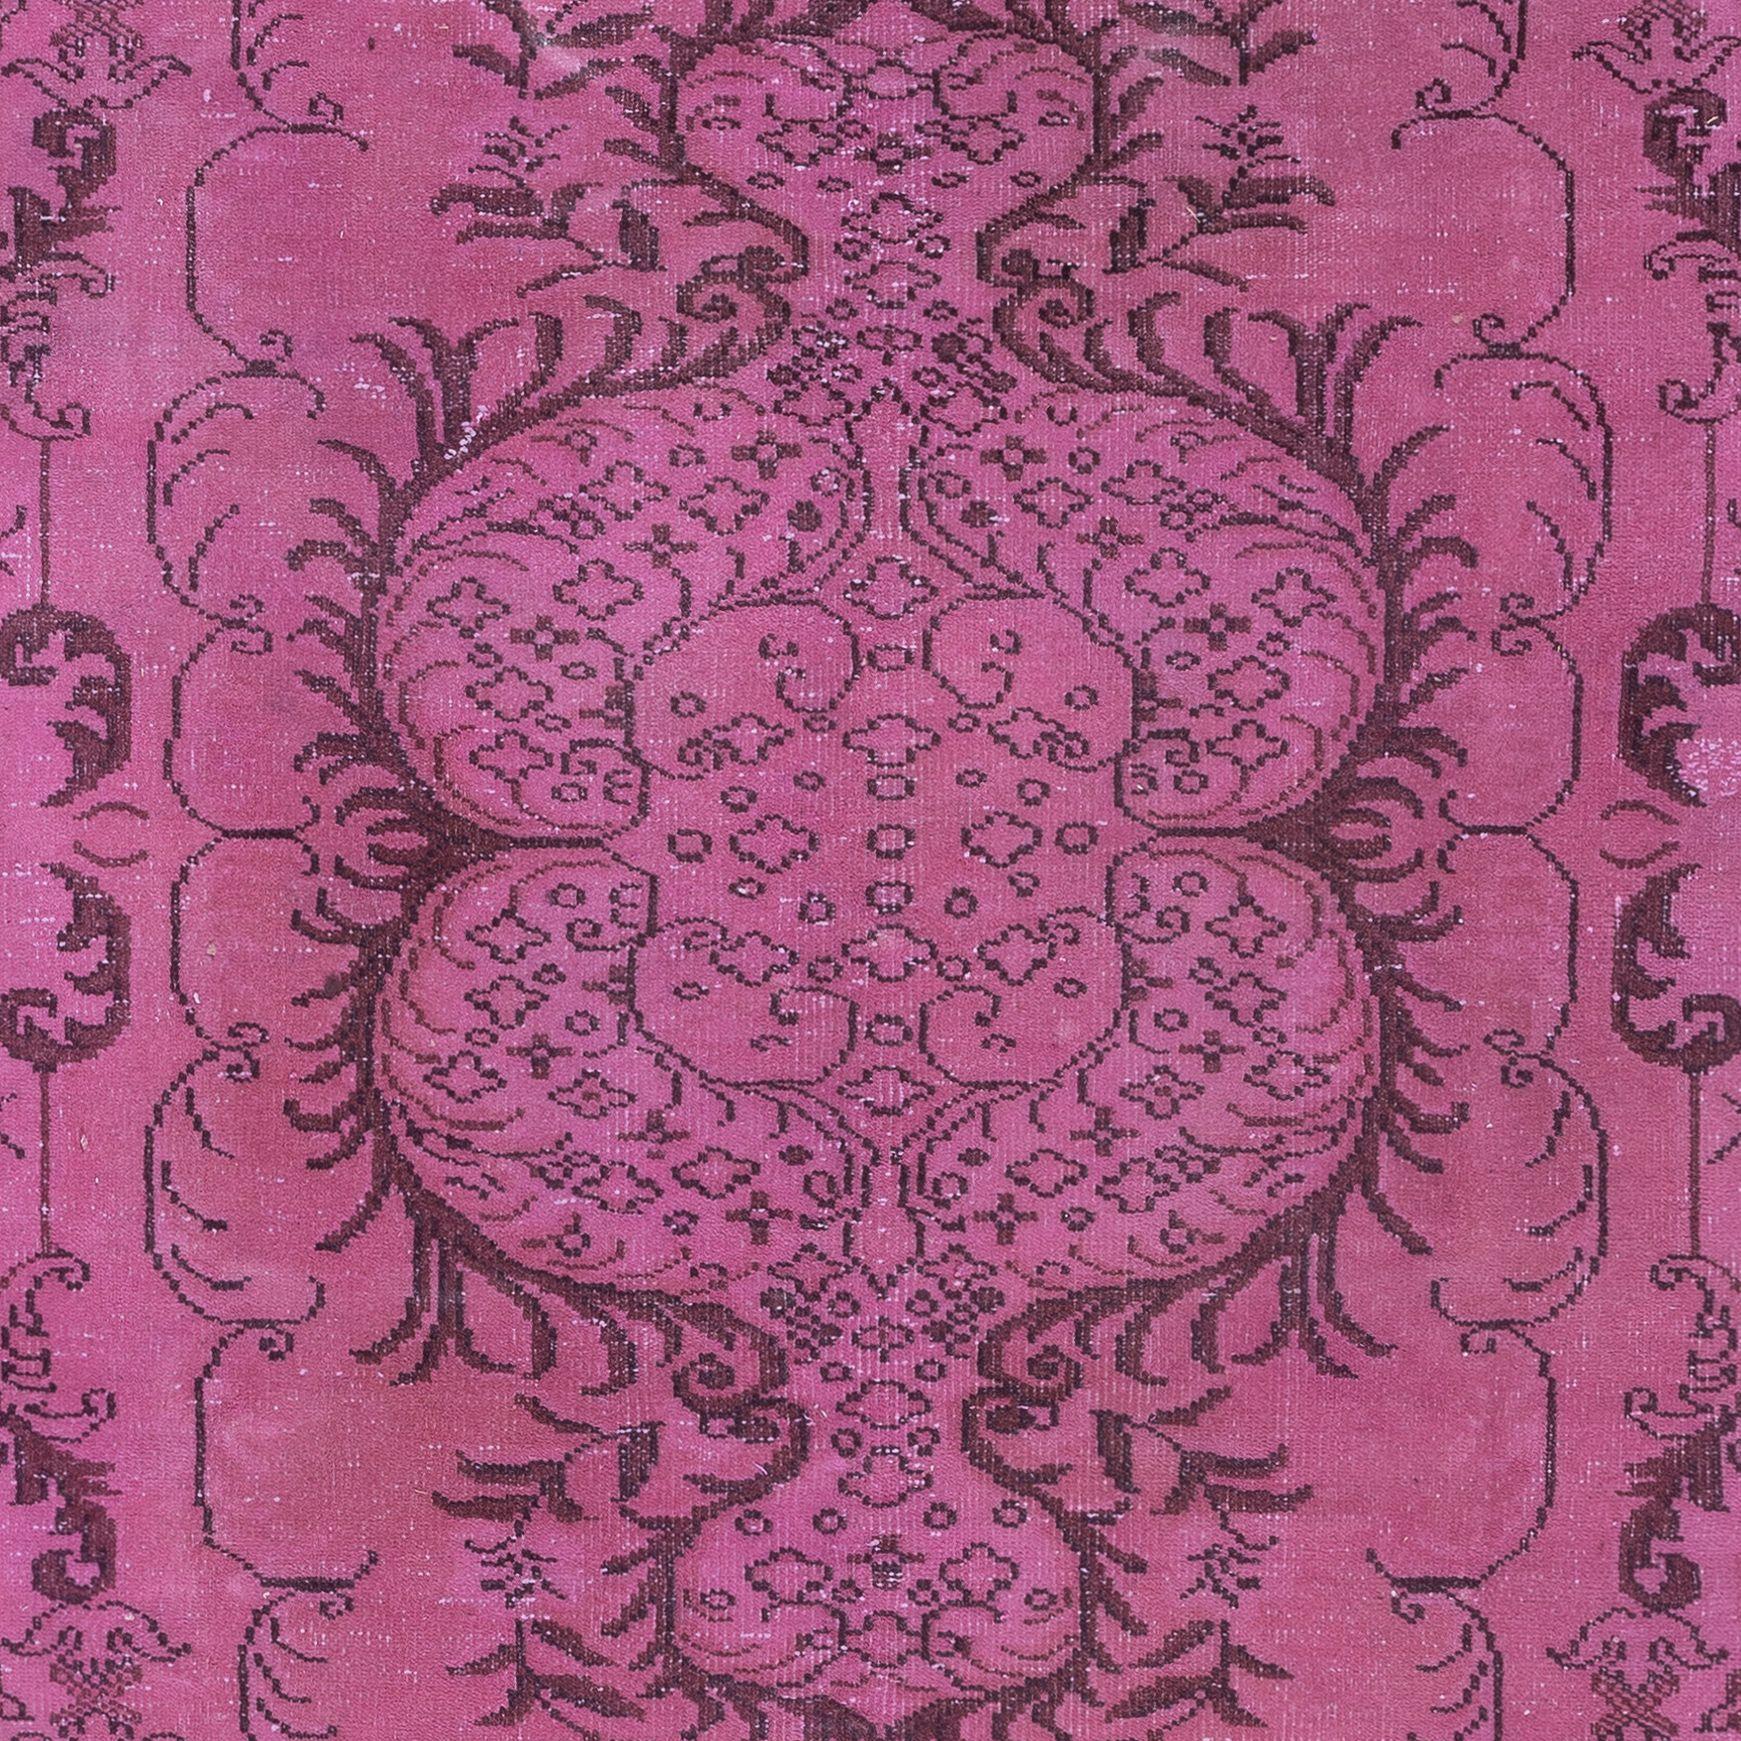 Turkish 6x10 Ft Modern Medallion Design Rug in Pink, Handwoven and Handknotted in Turkey For Sale